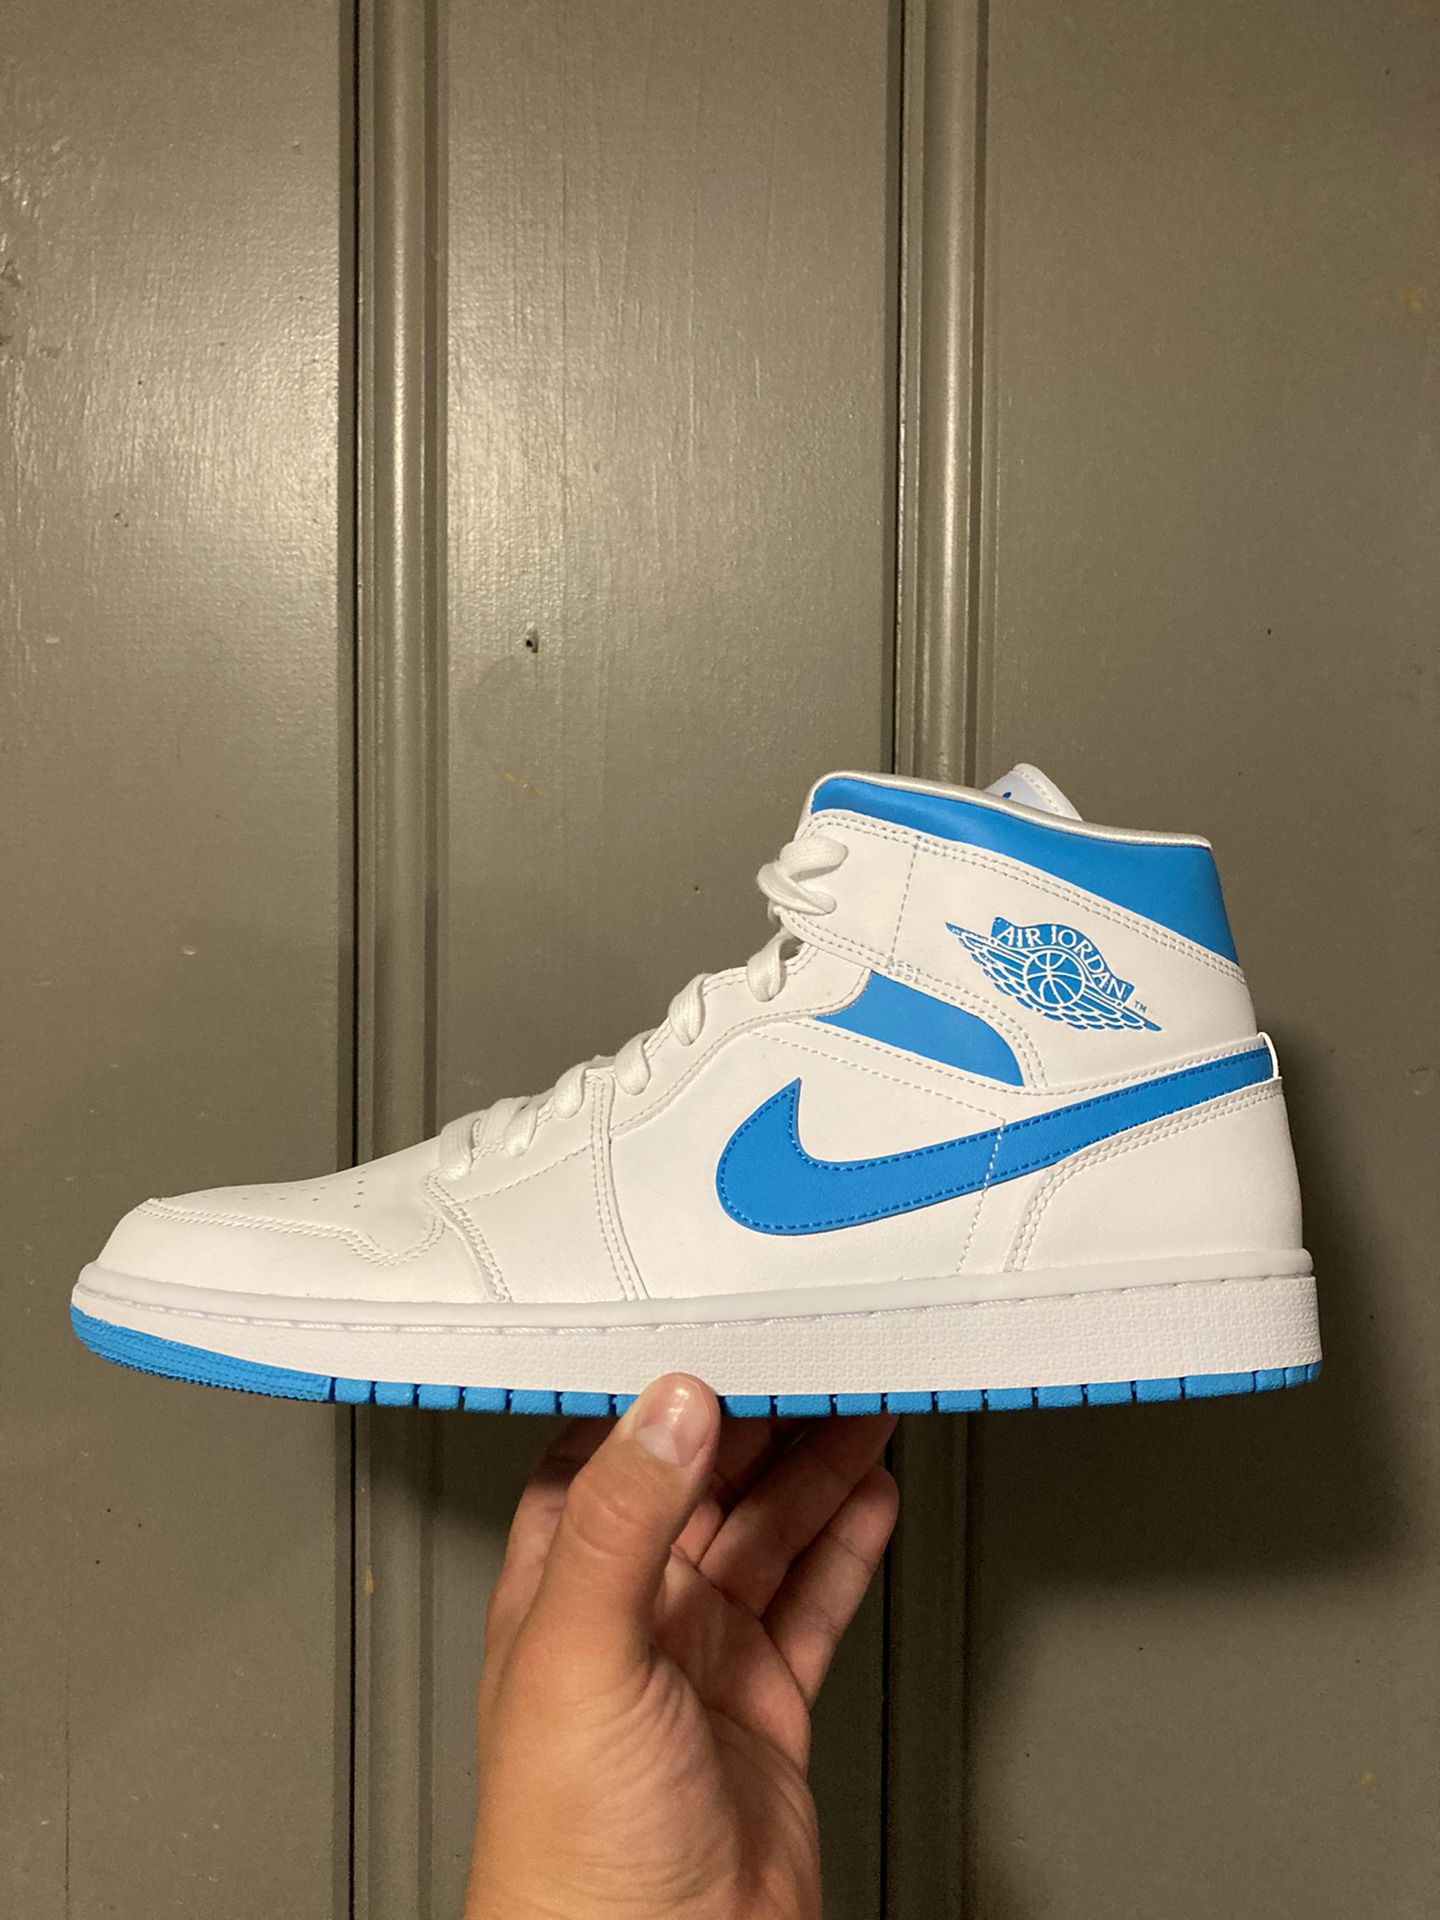 Jordan 1 retro mid. “North Carolina blue” size (12) in woman’s. (10.5) in men’s. DS(New) factory laced. $175. Picked up in Providence.